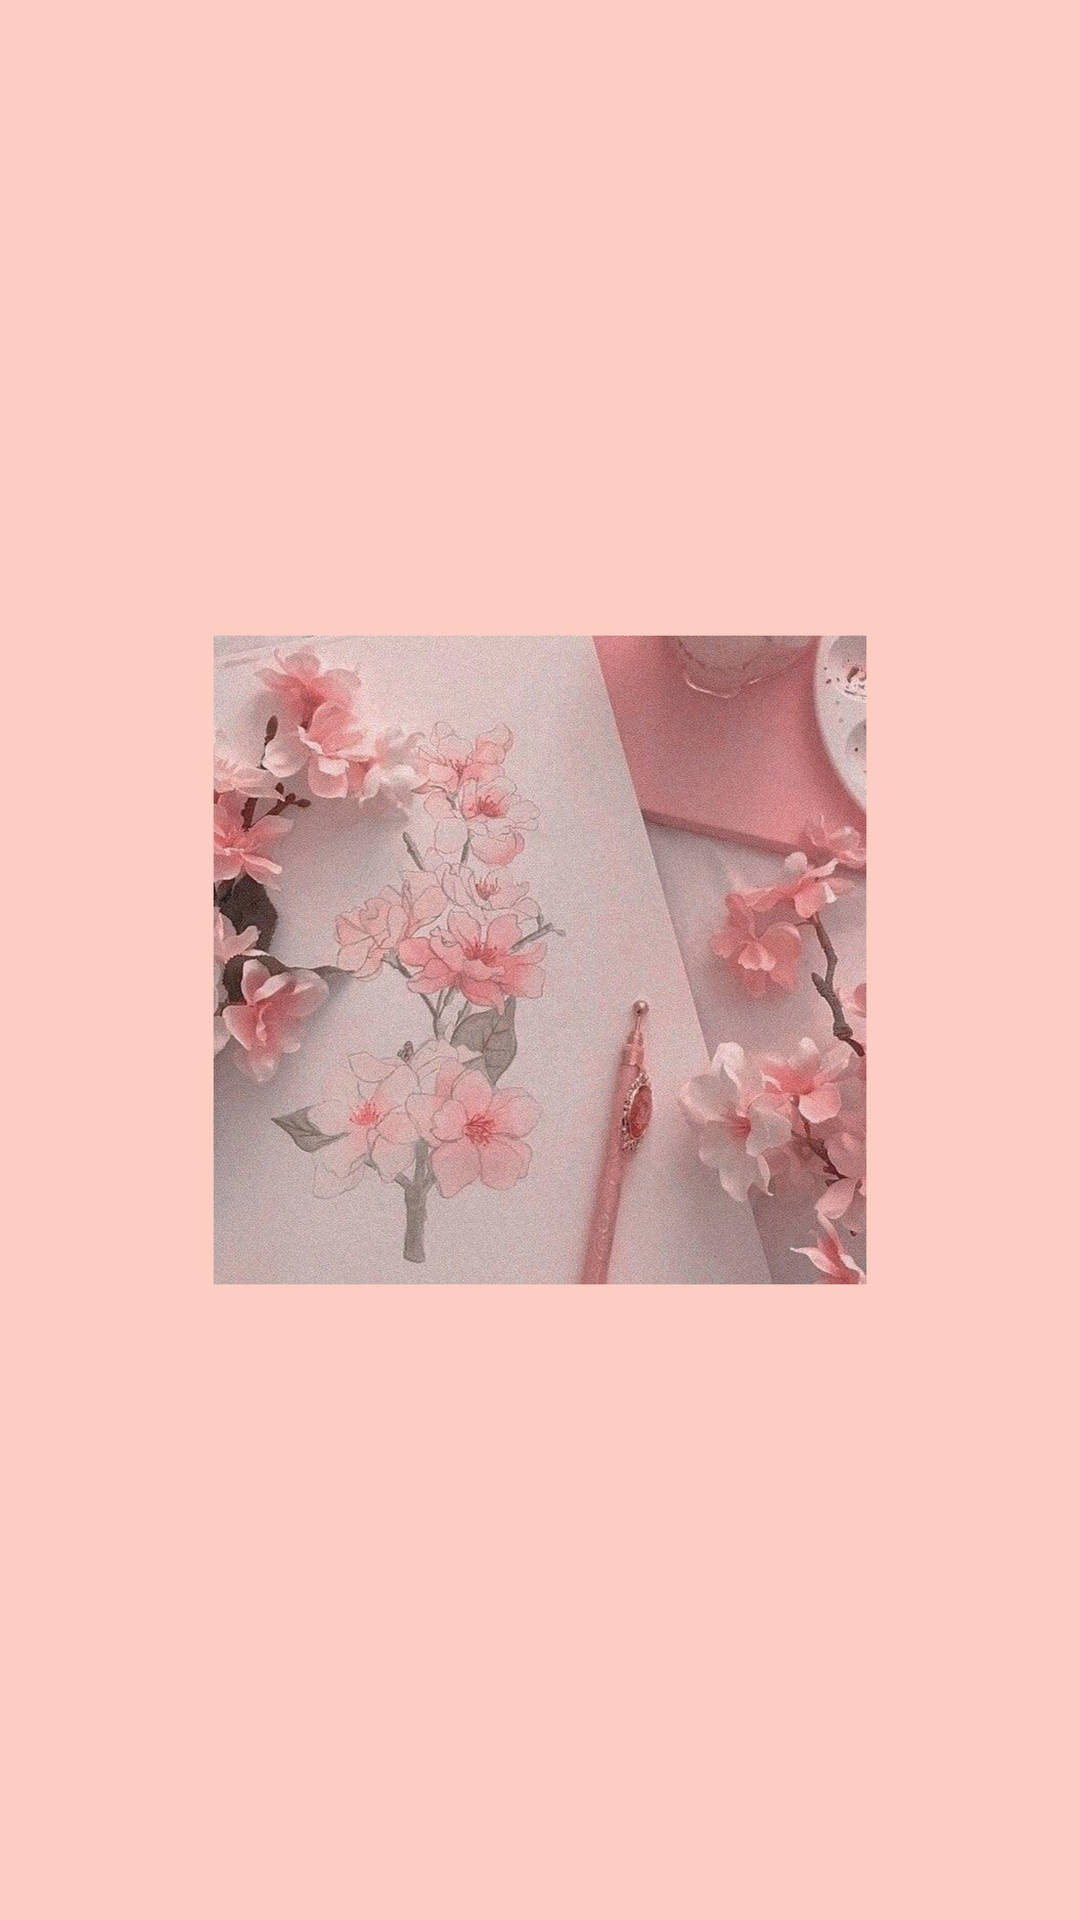 Free Iphone Pink Aesthetic Wallpaper Downloads, [100+] Iphone Pink  Aesthetic Wallpapers for FREE 